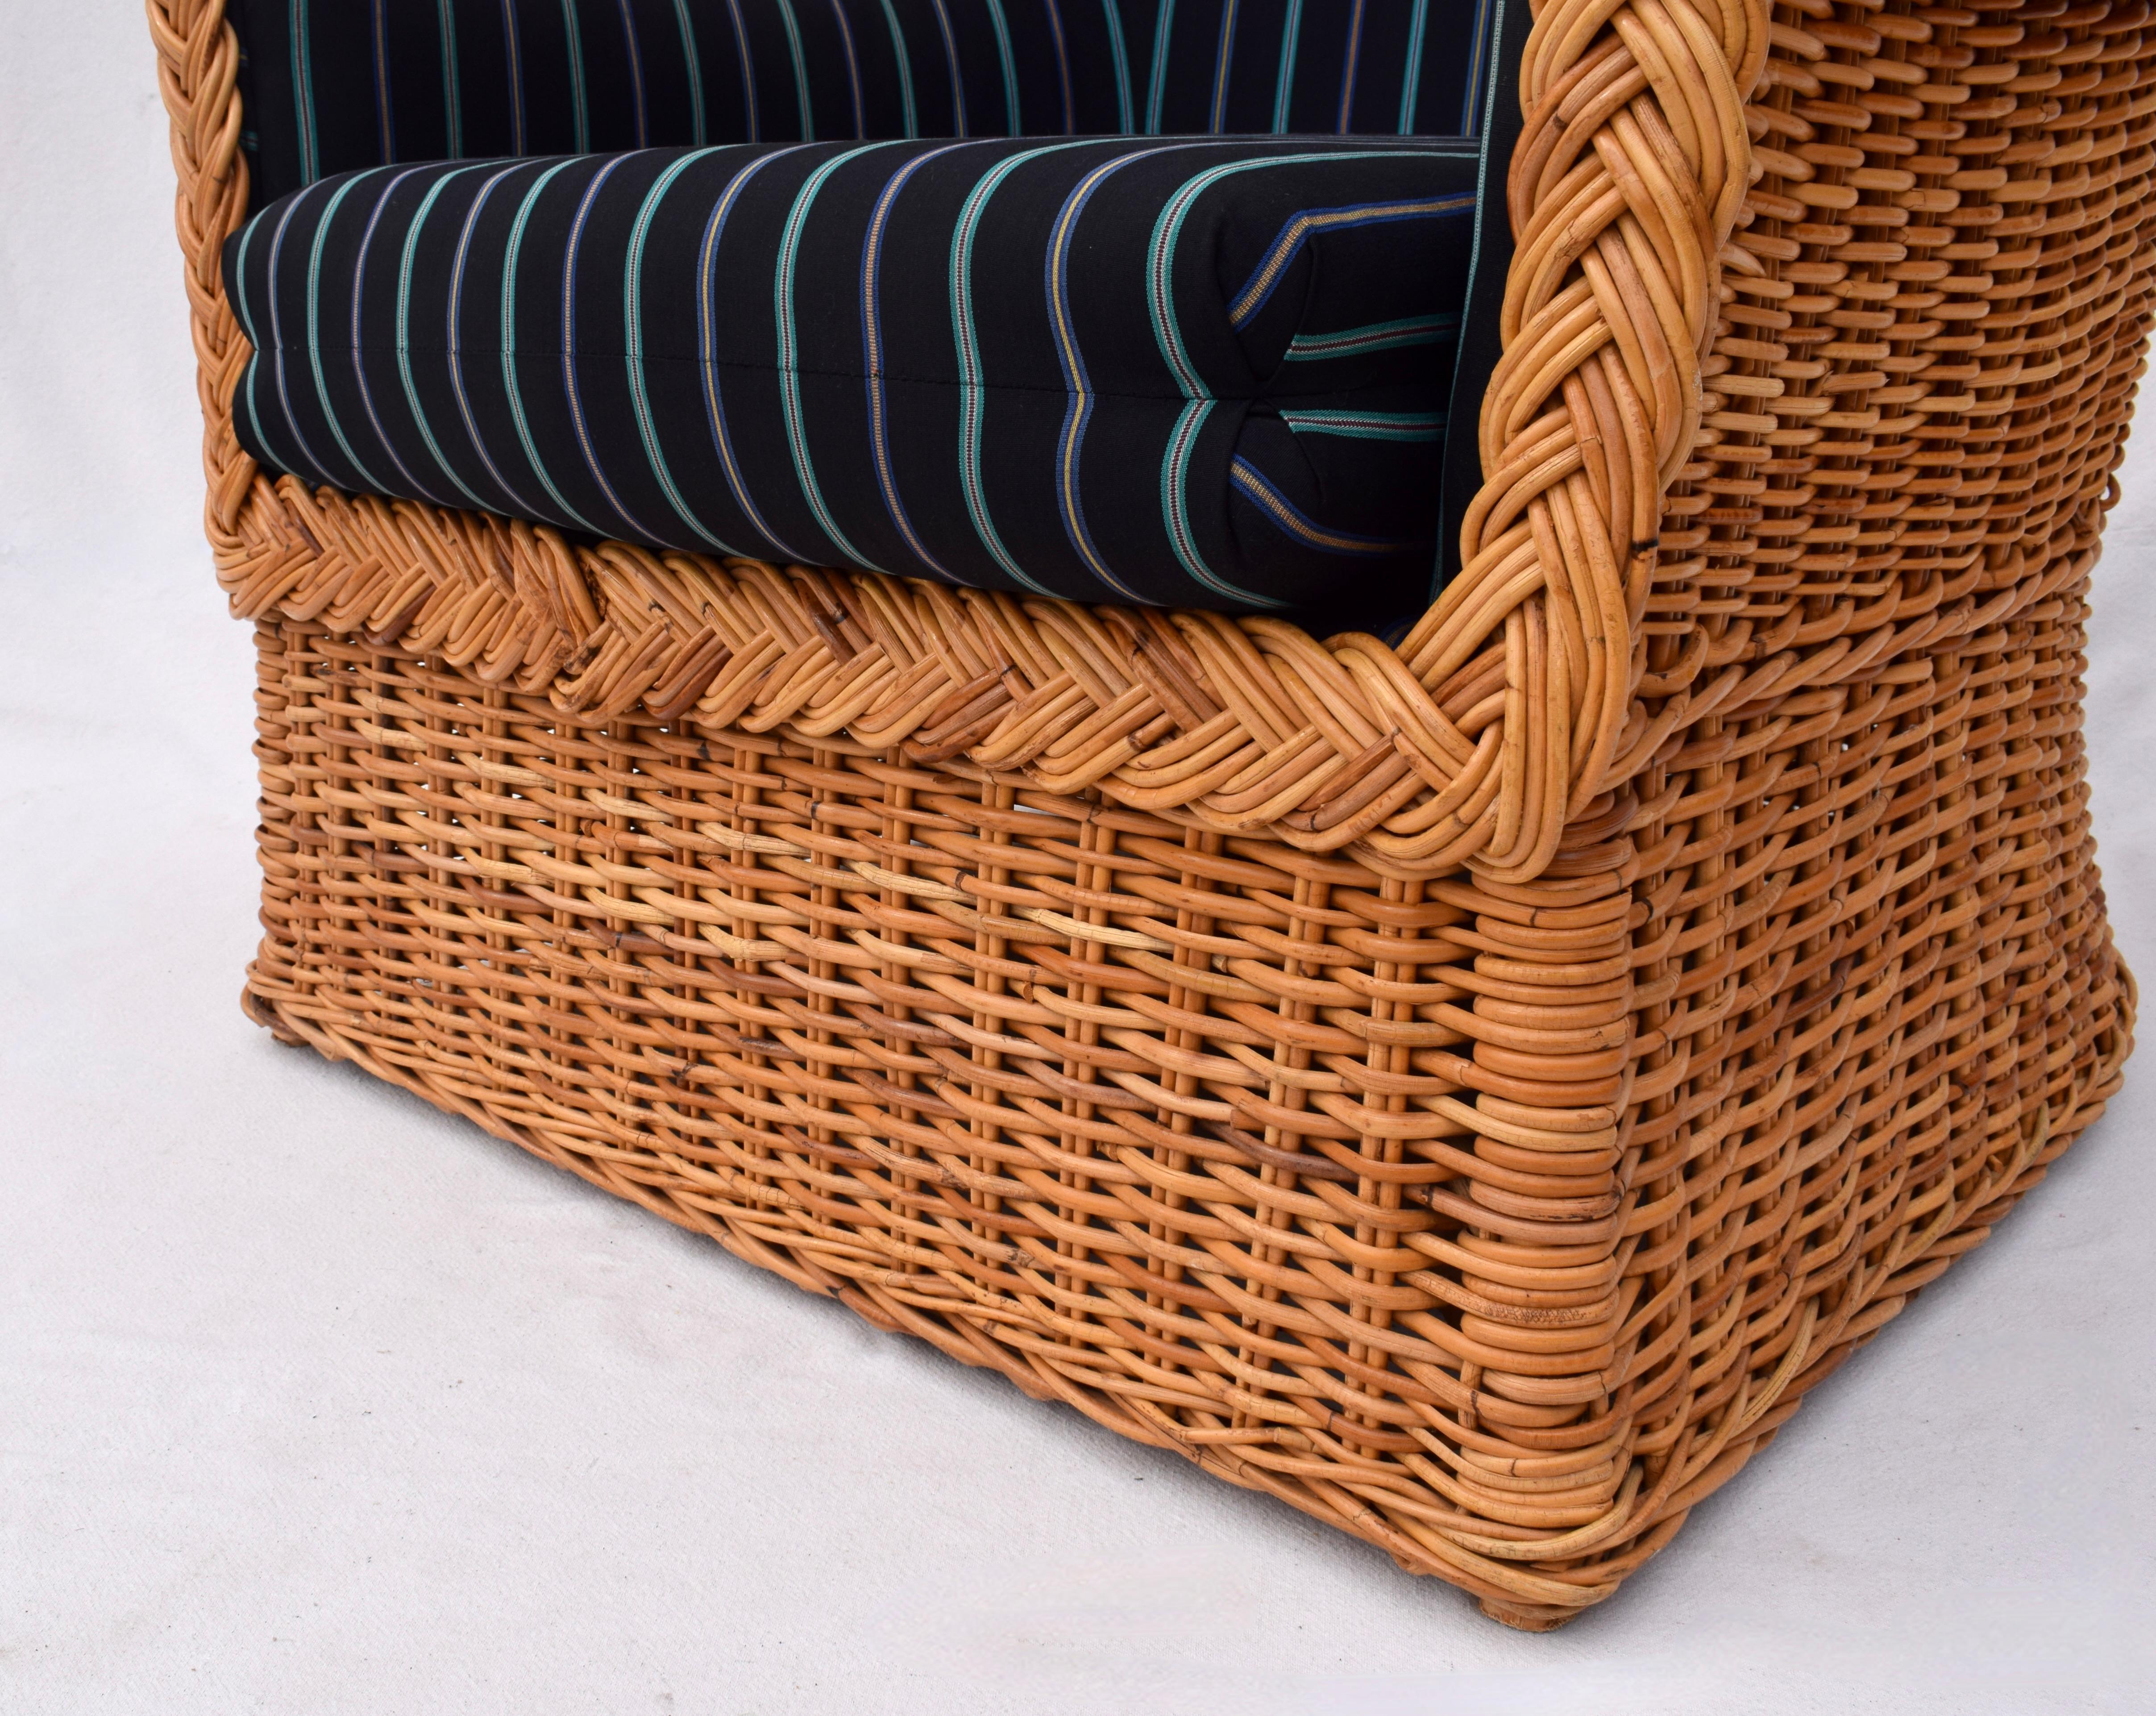 1980's Wicker Works Braided Rattan Club Chairs, Pair For Sale 3